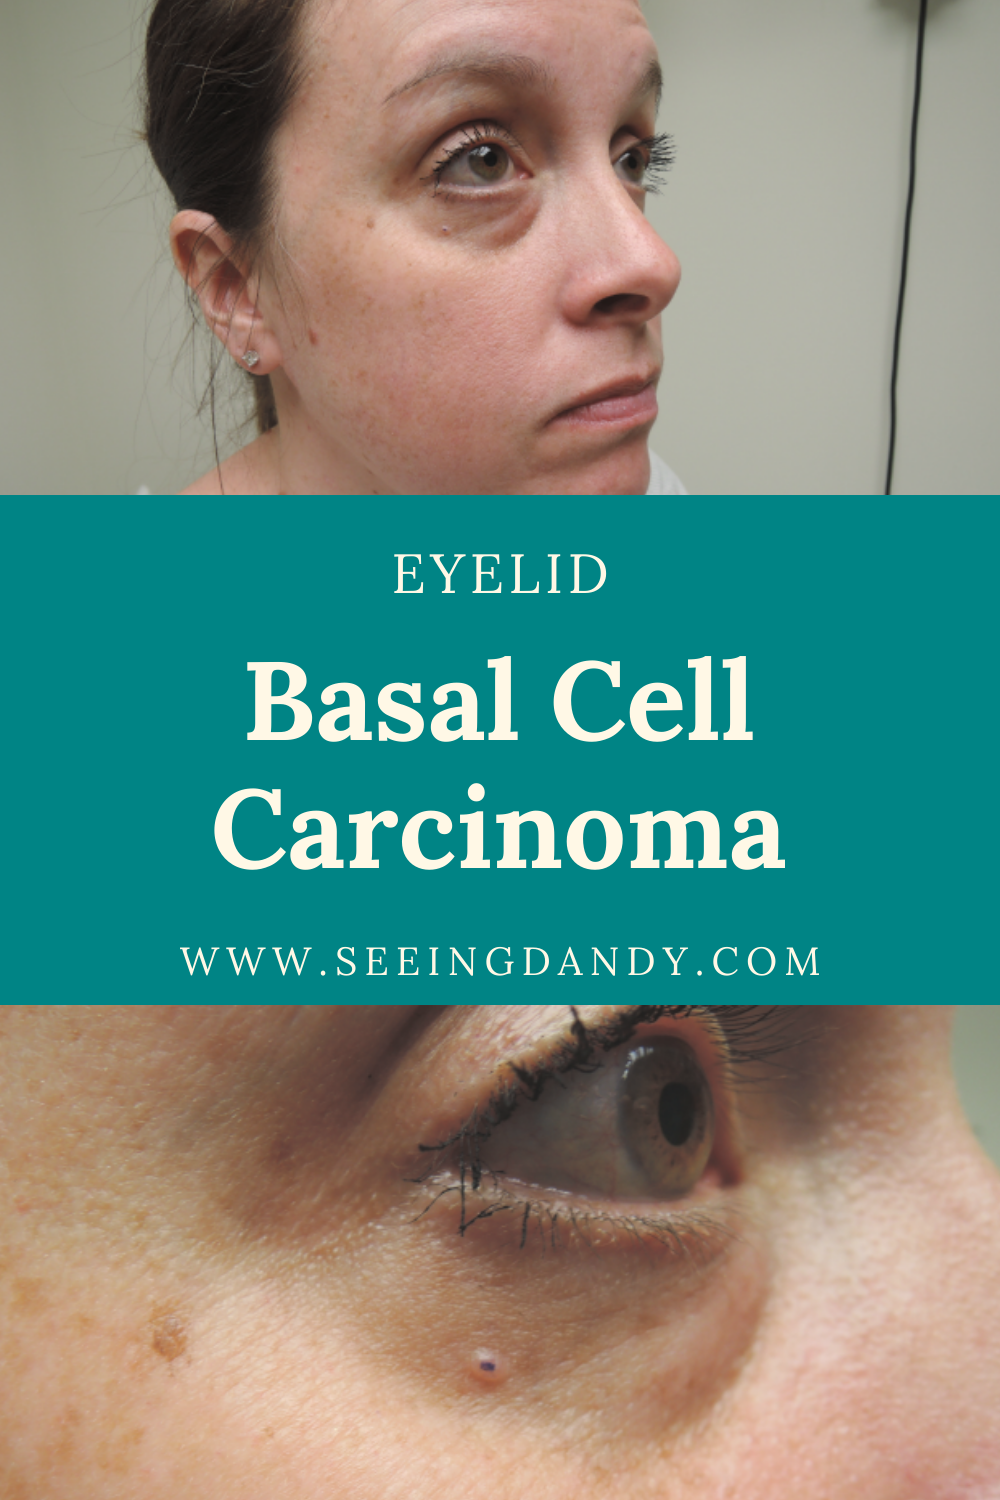 skin cancer, lower eyelid basal cell carcinoma, basal cell carcinoma, dermatology, mohs surgery